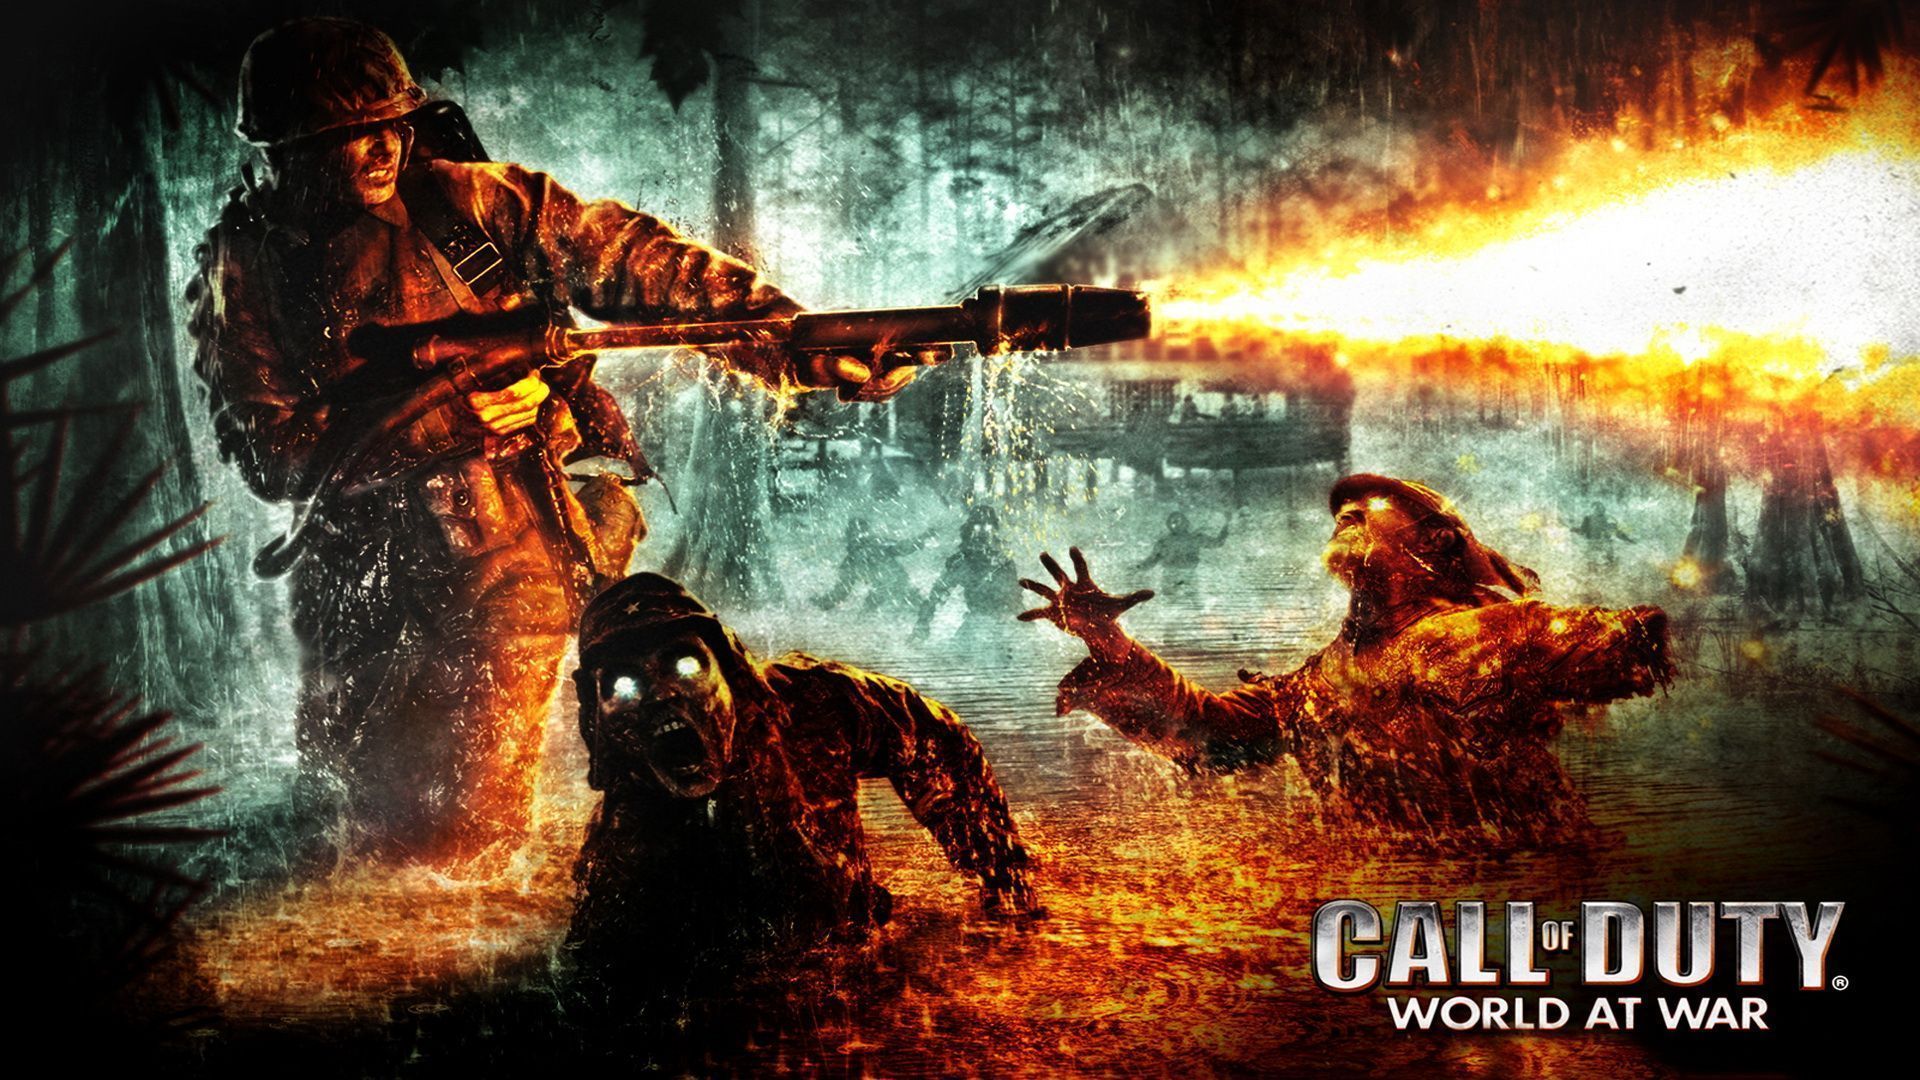 Call of Duty 5 World at War Wallpapers and Images Cool Backgrounds